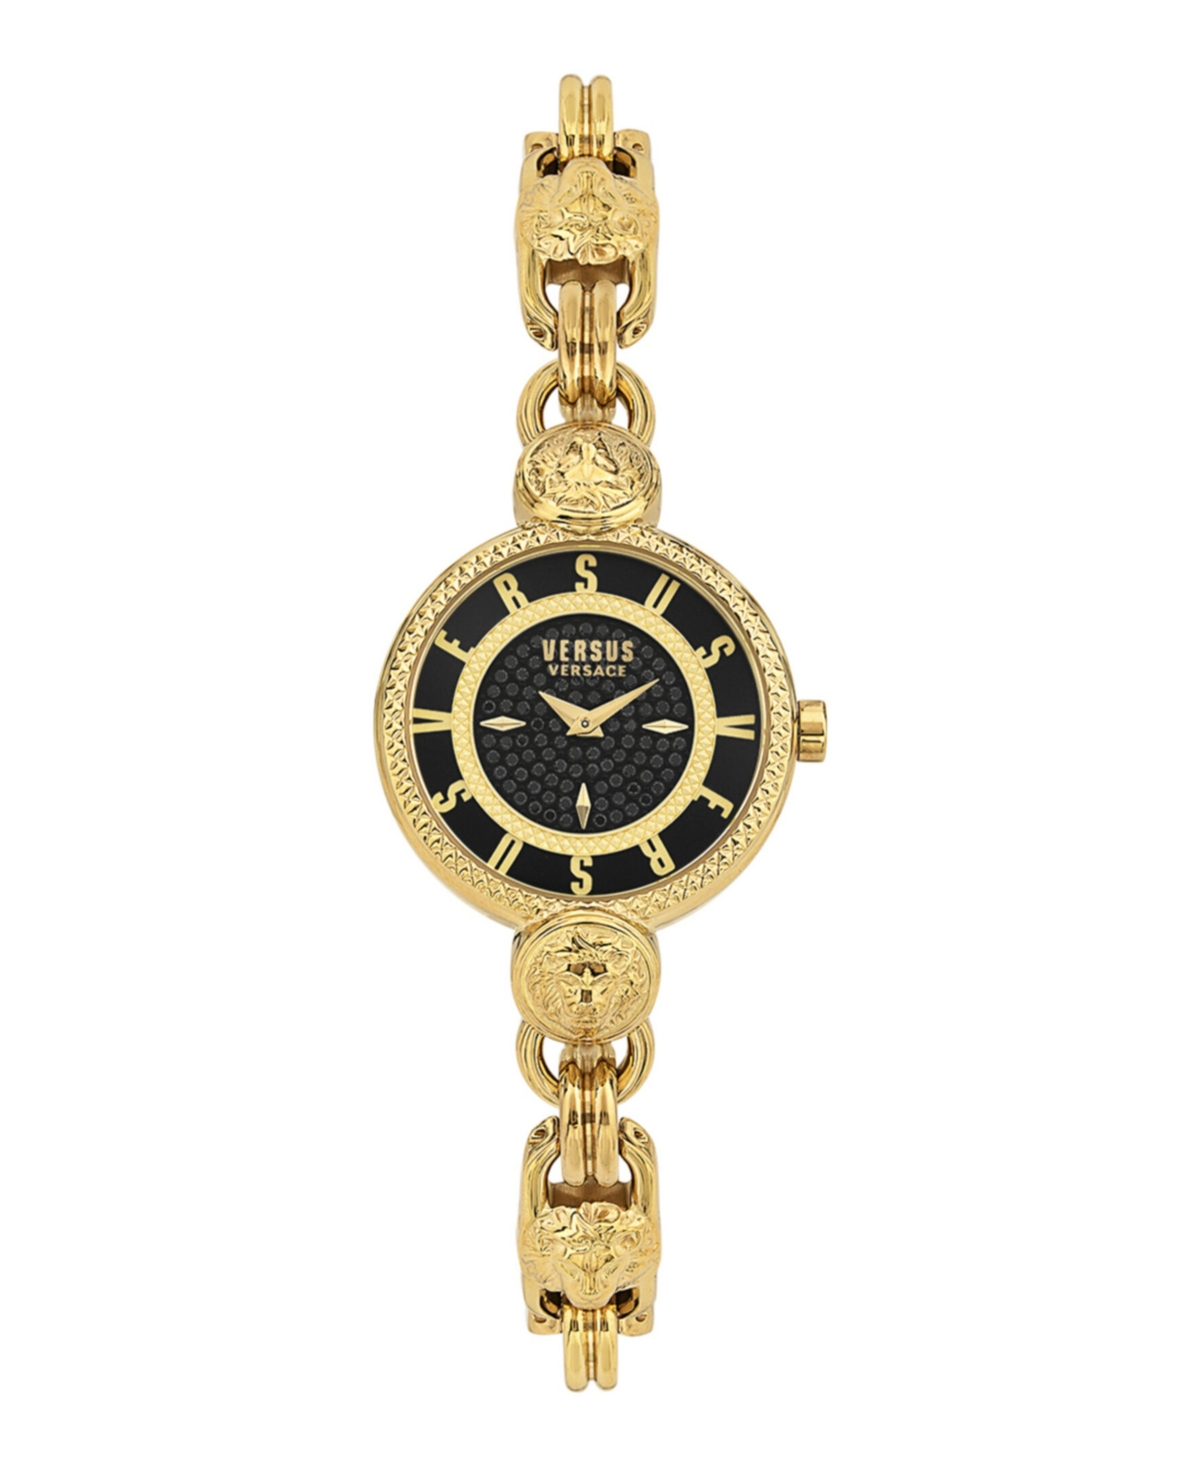 Versus Women's Les Docks Petite 2 Hand Quartz Gold-tone Stainless Steel Watch, 30mm In Ion Plating Yellow Gold